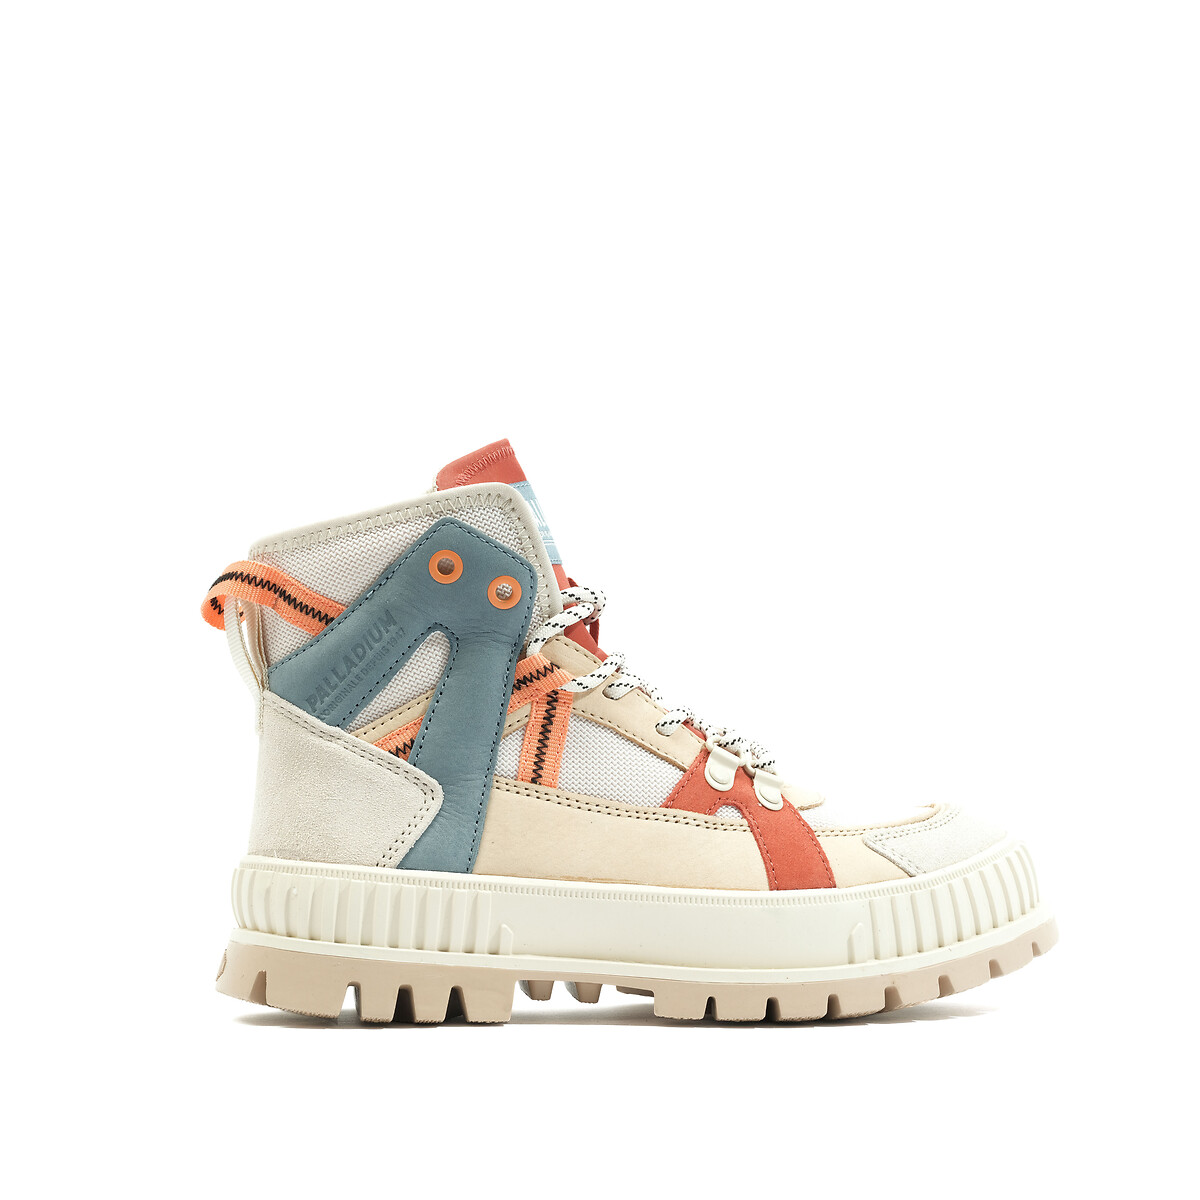 Pallashock Outcity High Top Trainers in Leather